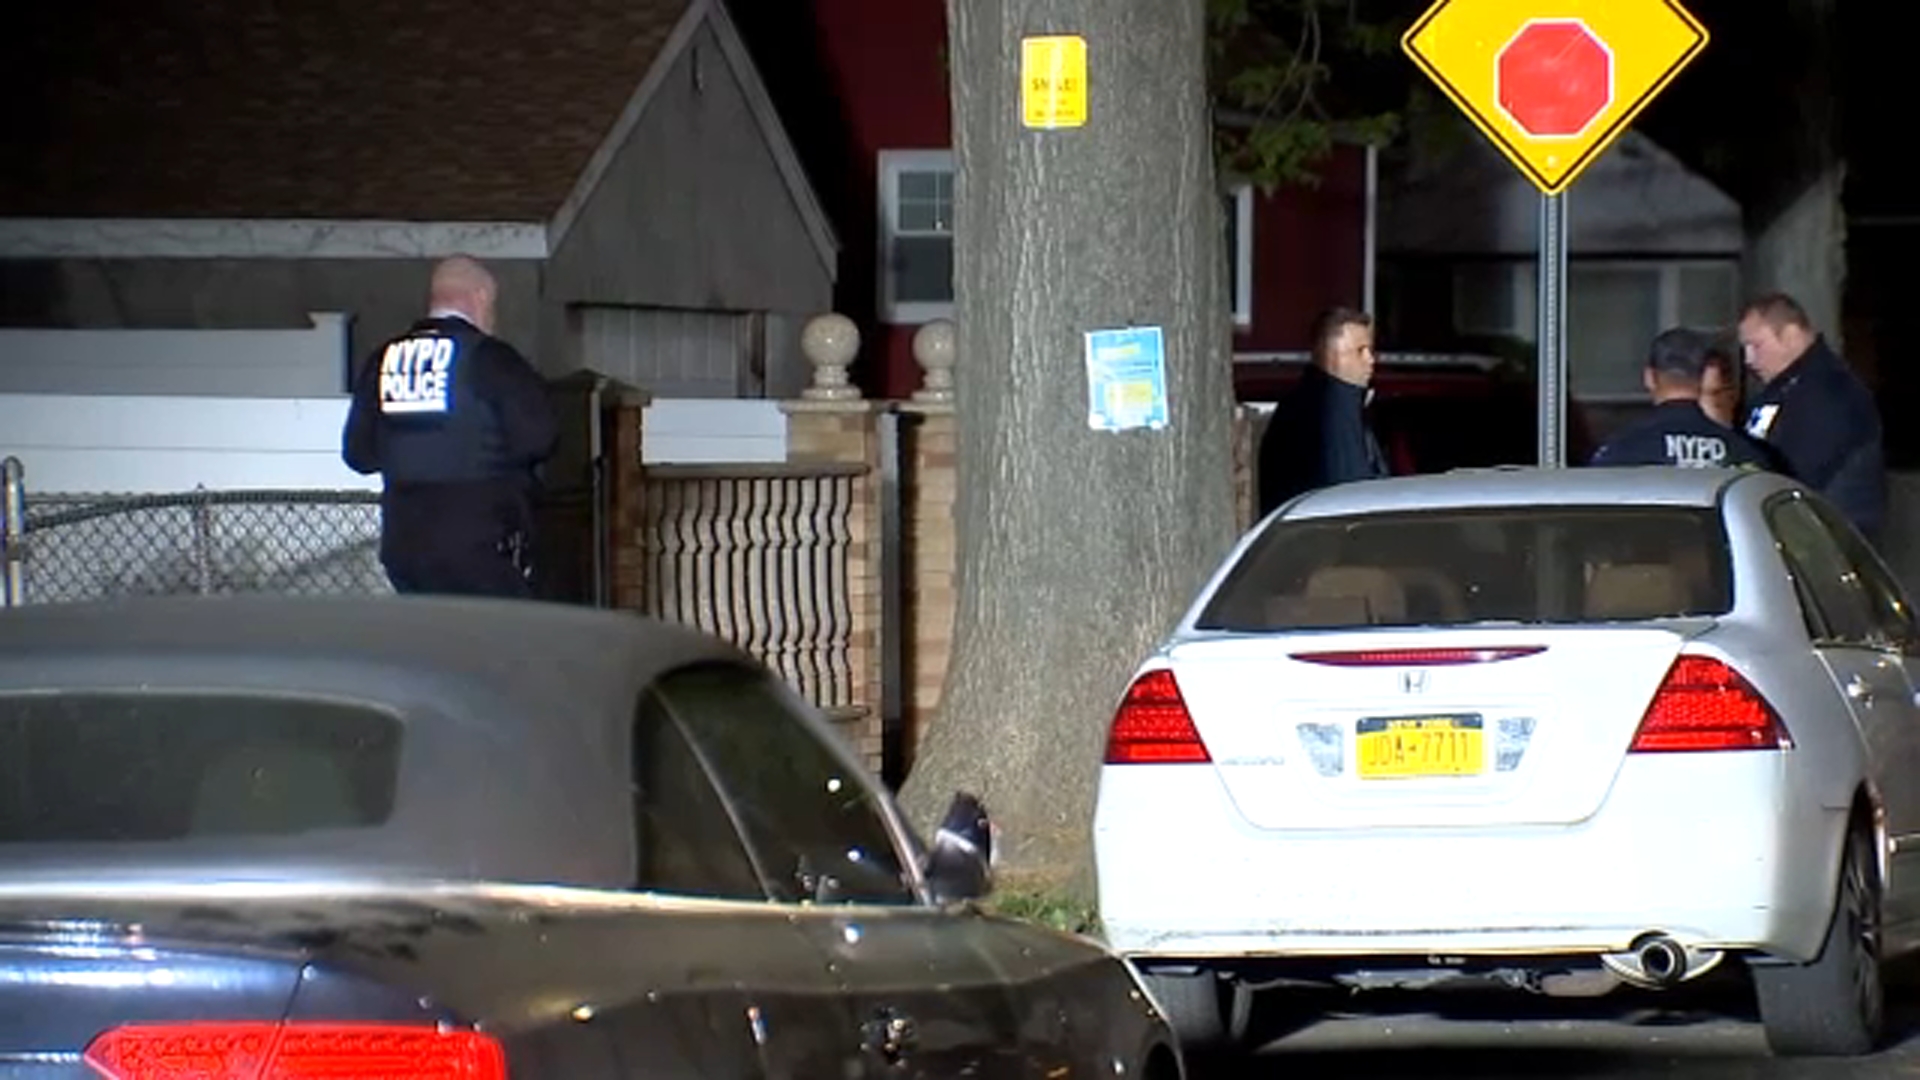 Suffolk County police officer shot responding to call in Coram